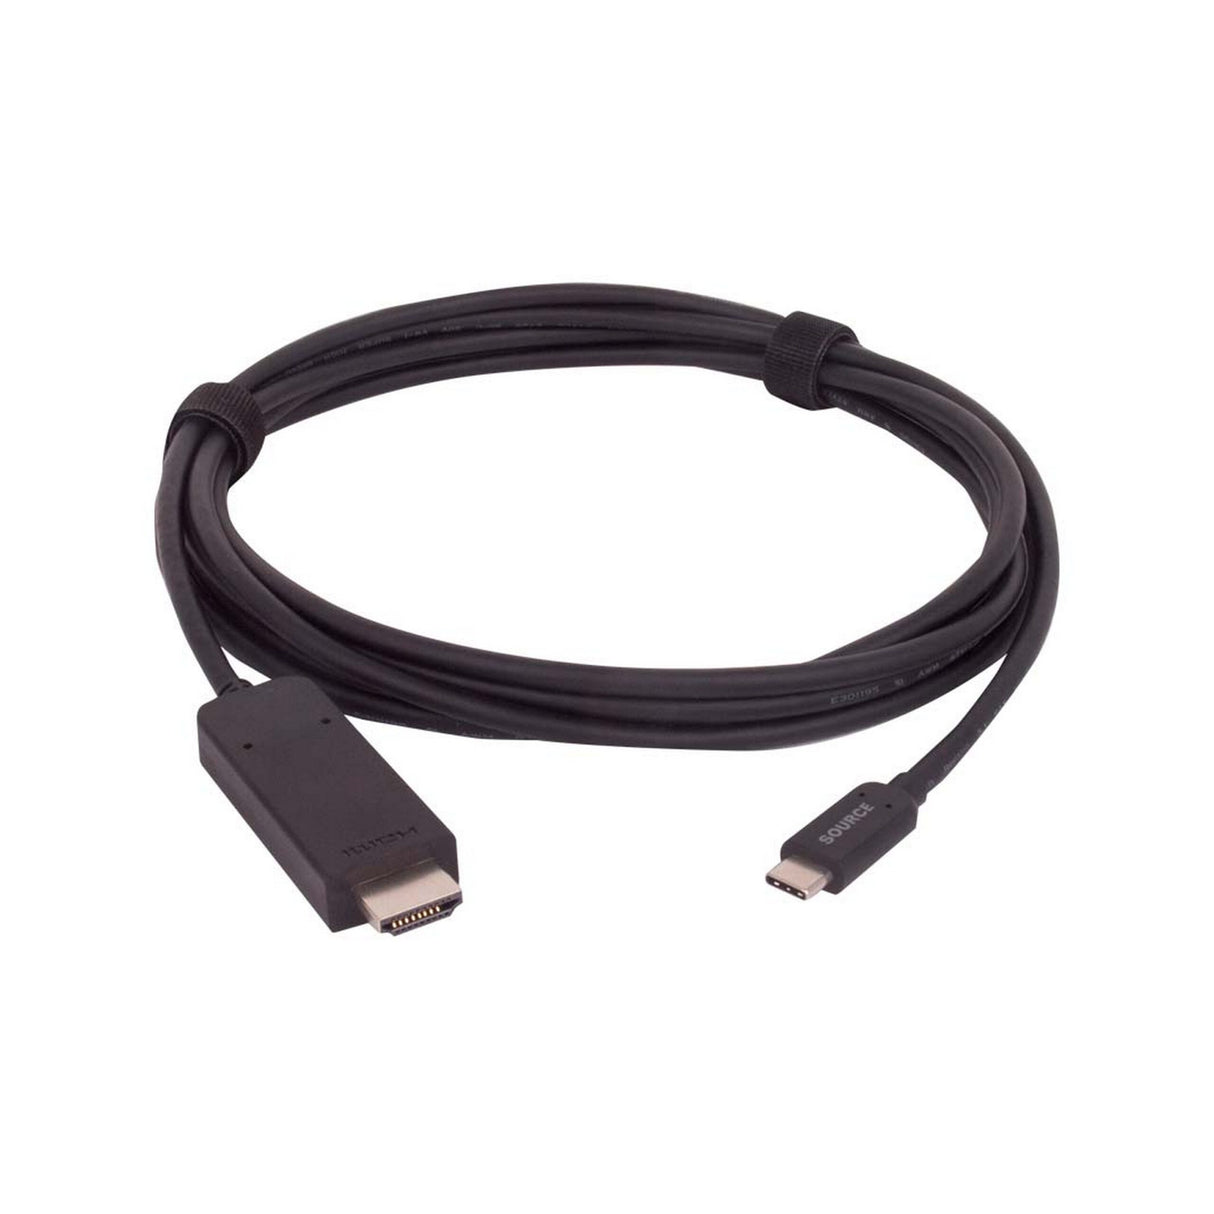 Liberty E-UCM-HDM-10F USB C Male to HDMI A Male Cable, 10 Foot